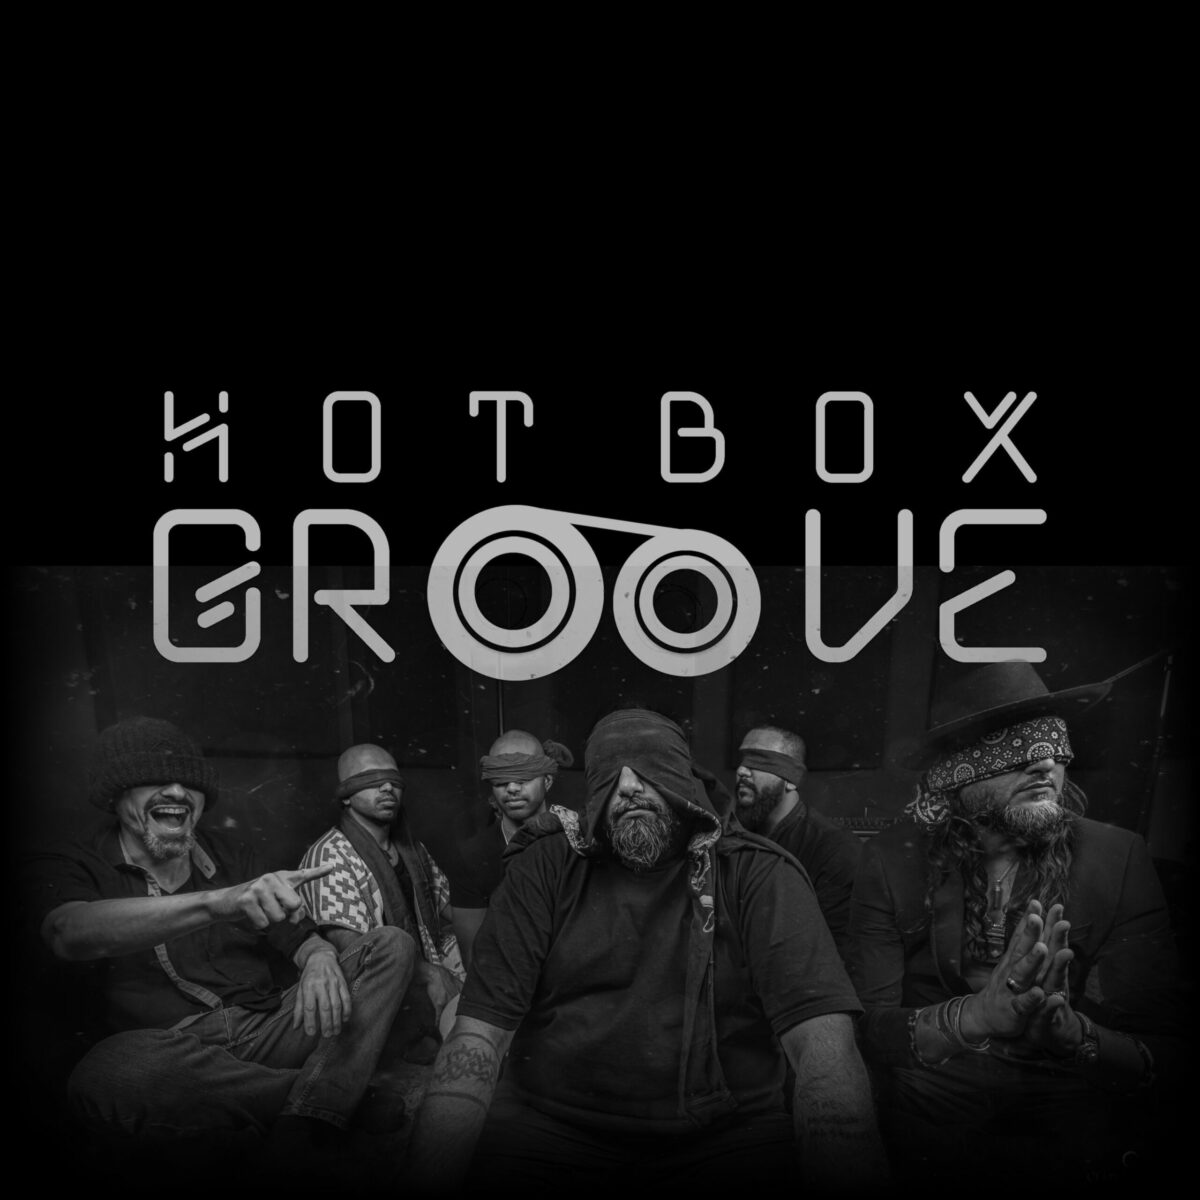 Bahrain-based band Hotboxgroove are at their groovy best on Midnight Blooms - Independent Music - New Music